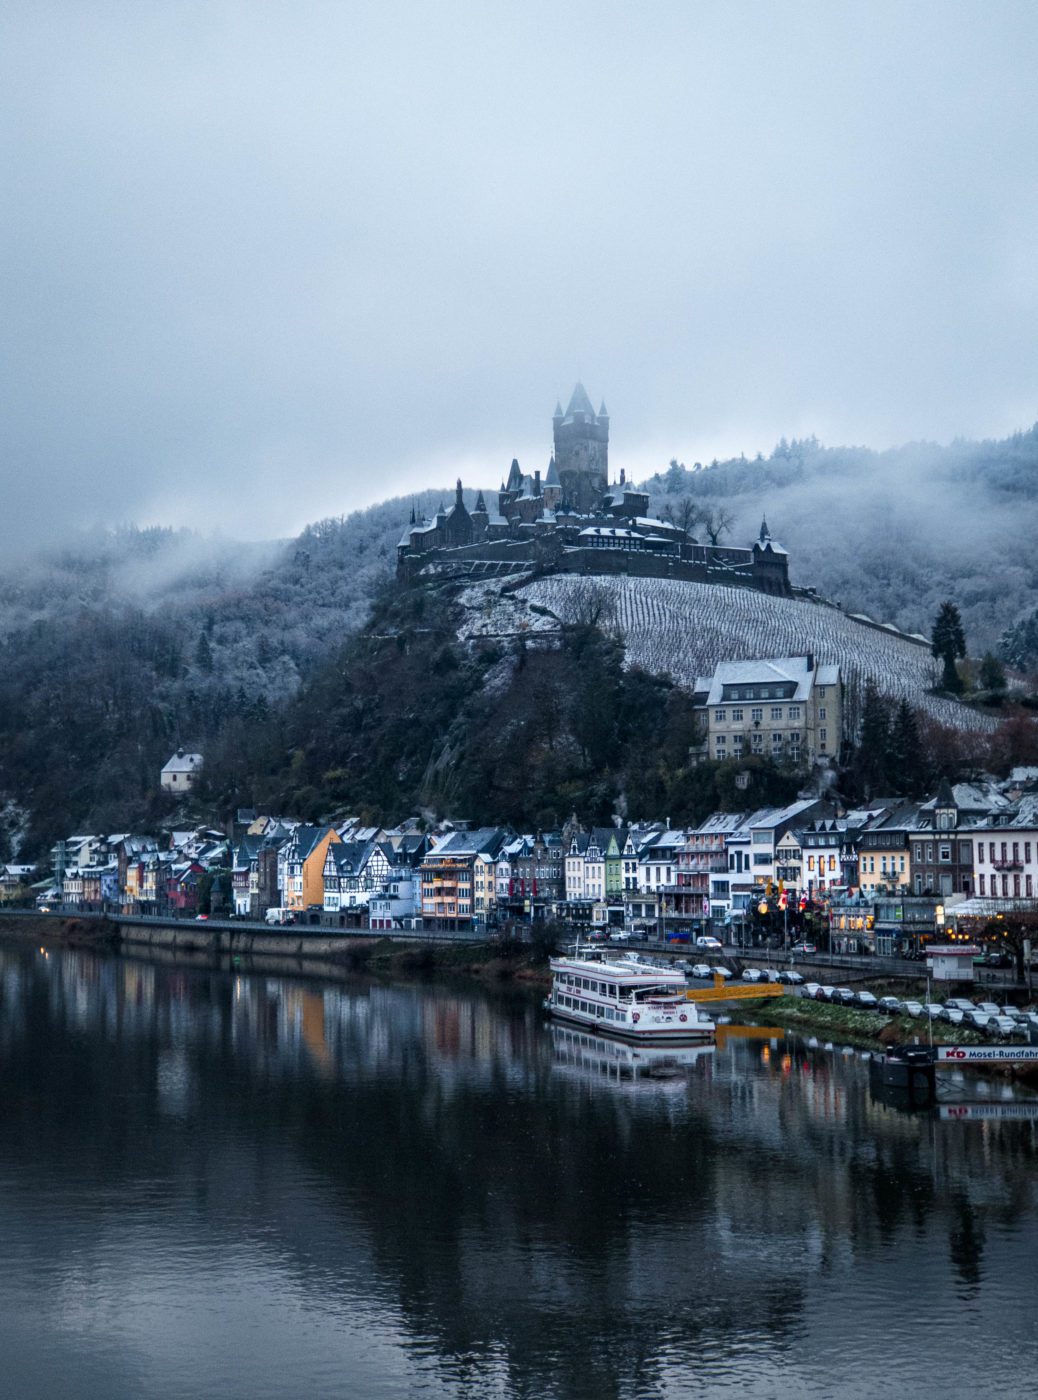 It had snowed in Cochem, Germany. Arriving in Cochem with MS VIVA One during my river cruise